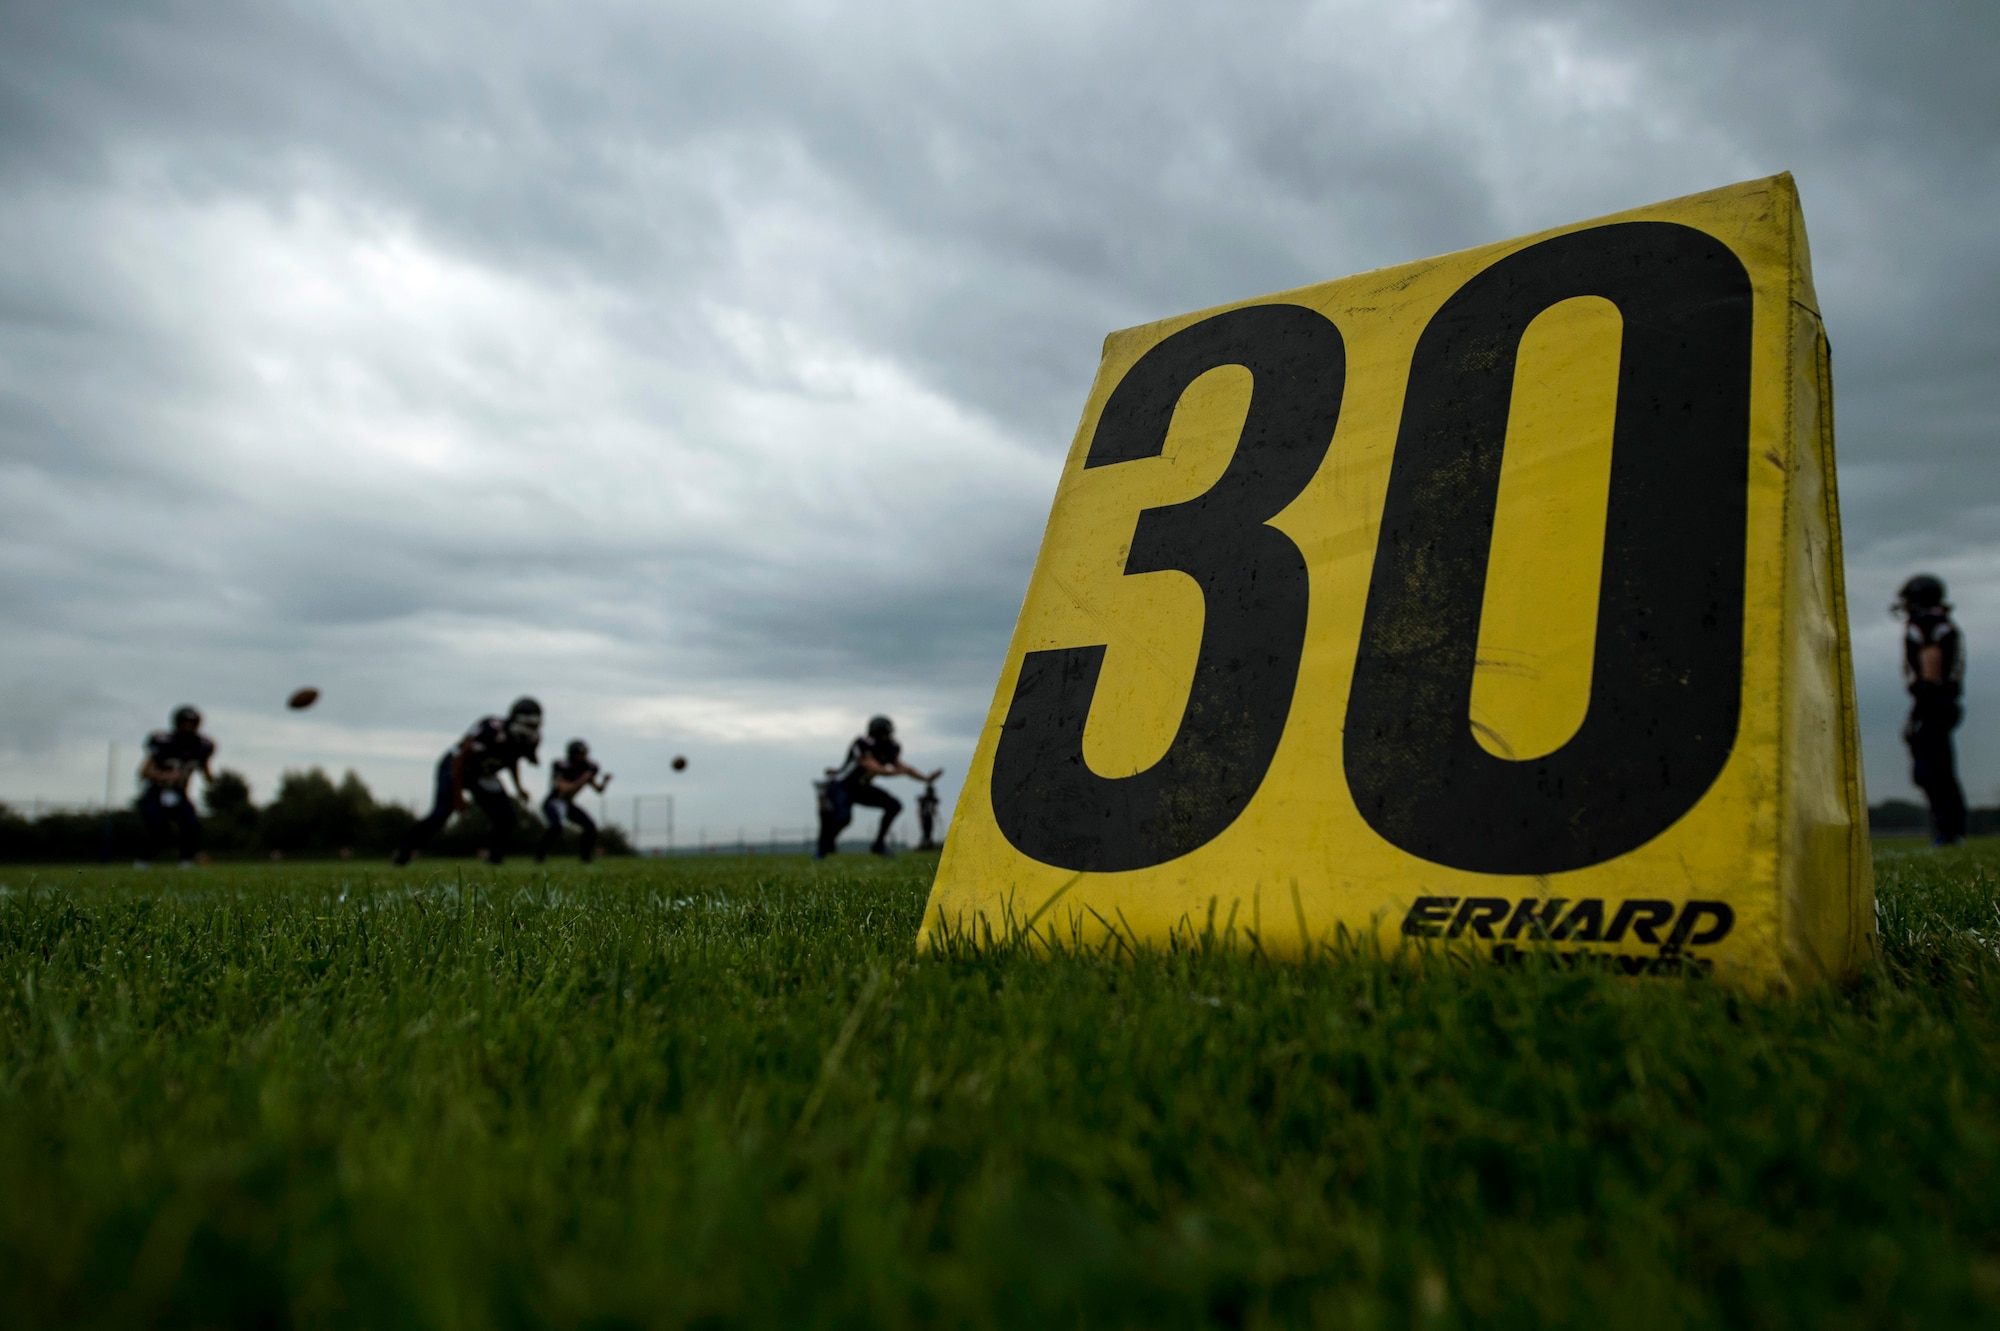 Members of the Bitburg Barons football team warm up prior to the start of their season opener game against the Baumholder Buccaneers Sept. 6, 2014, at Bitburg Annex, Germany. The Barons led 12-8 at the end of the 1st quarter. (U.S. Air Force photo by Senior Airman Rusty Frank/Released)